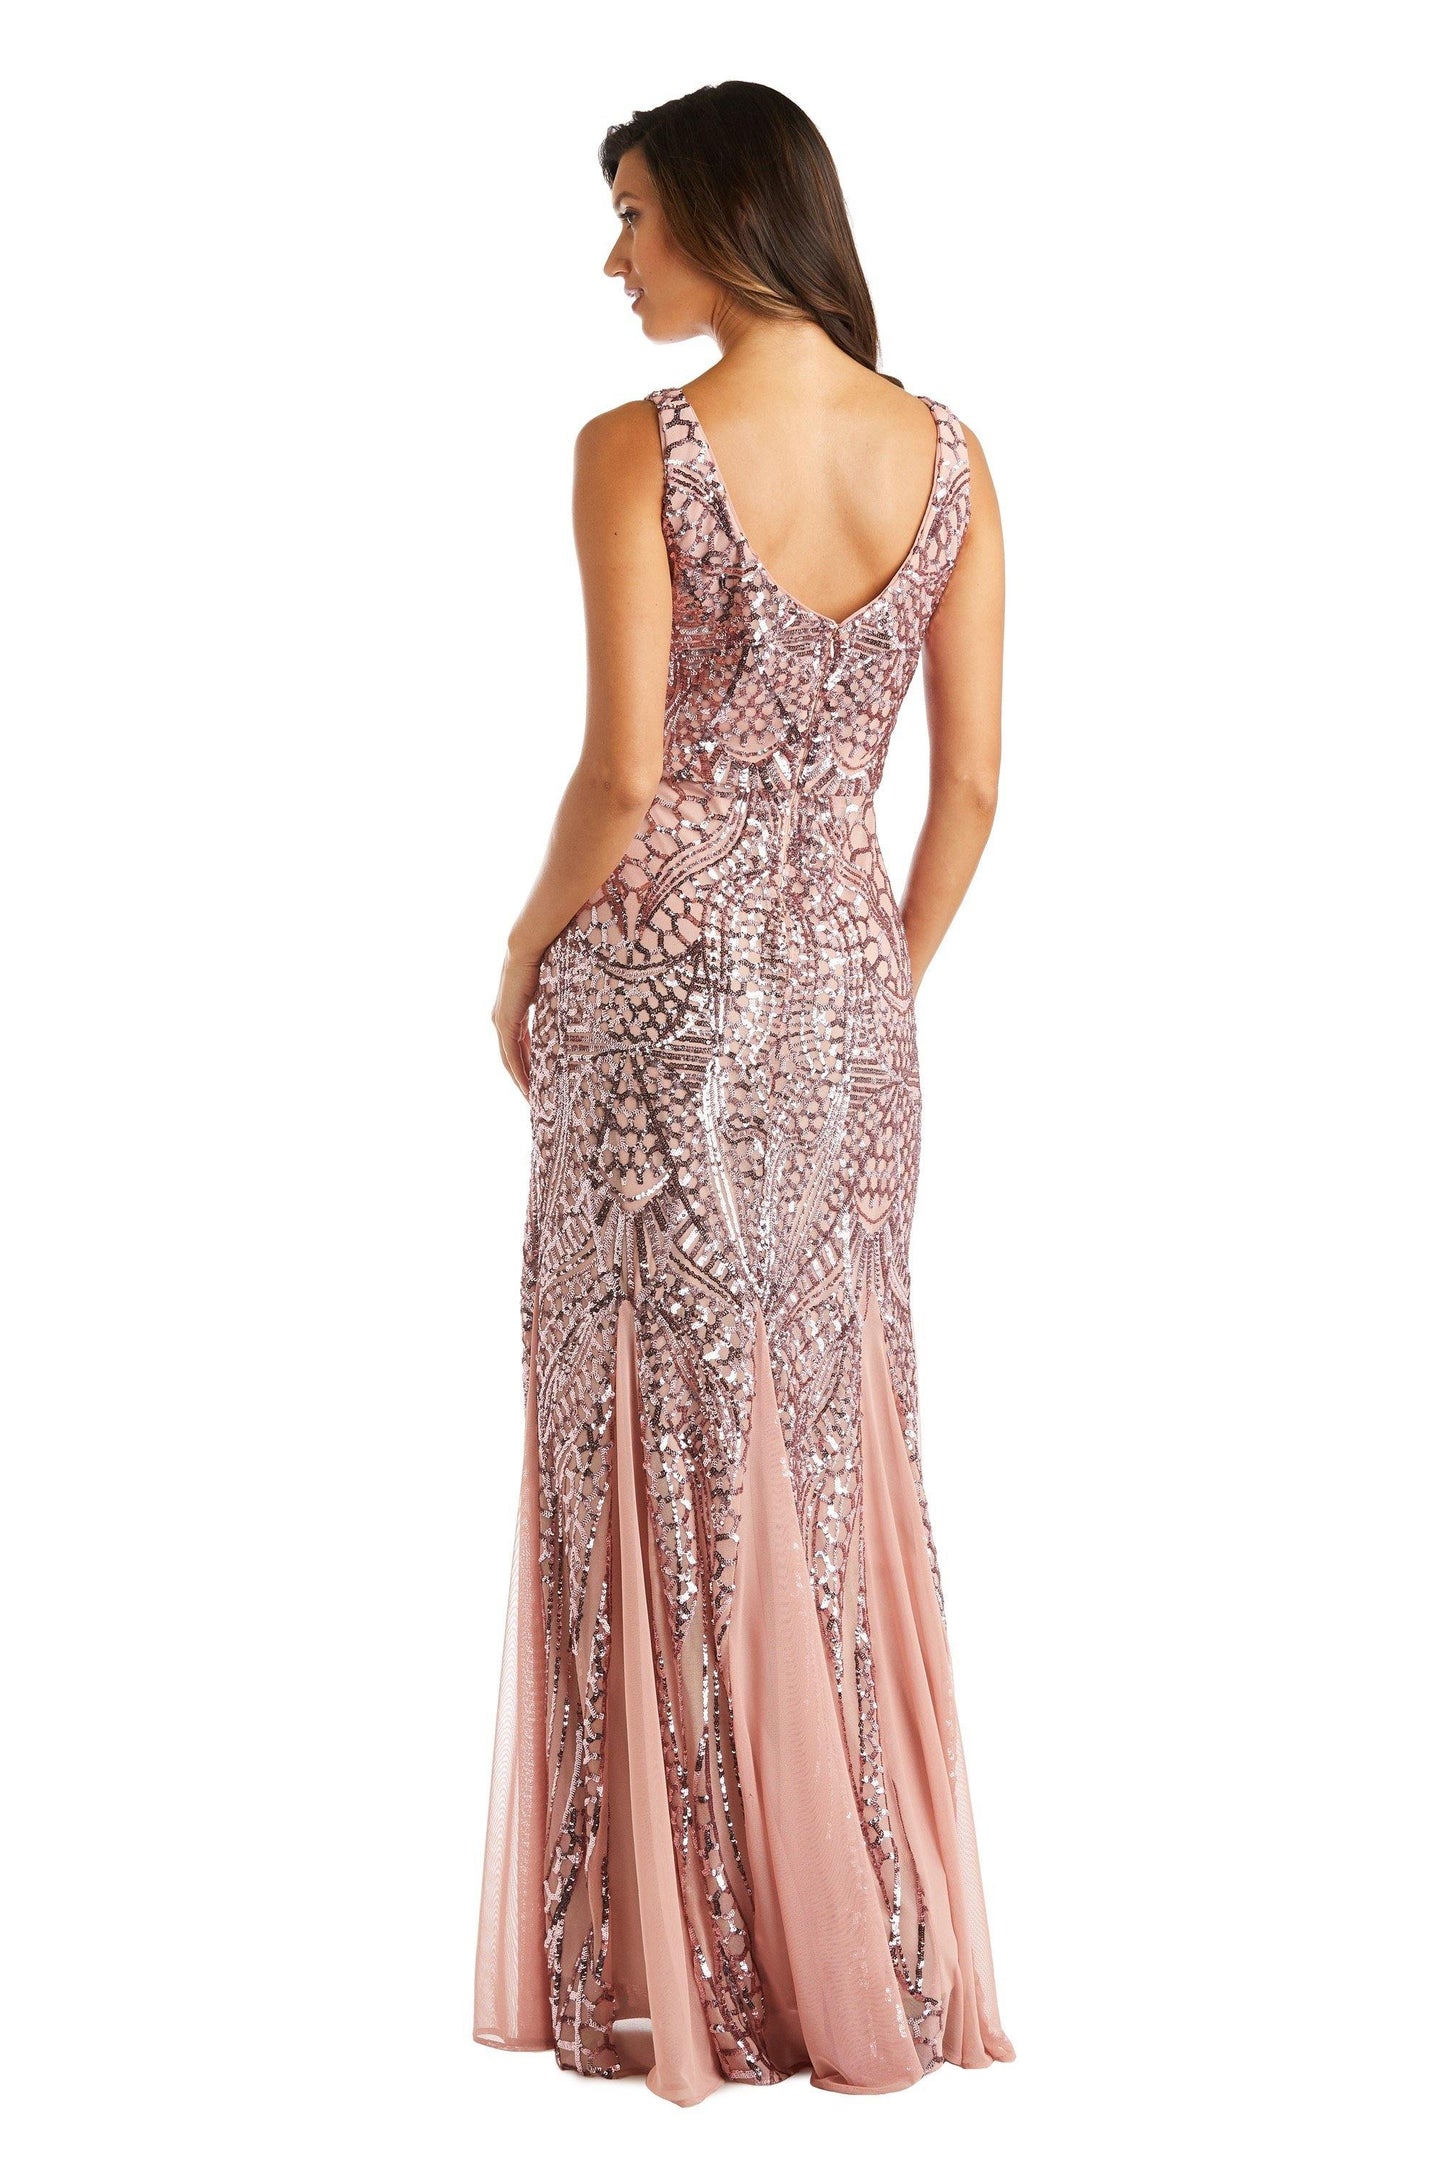 Nightway Long Formal Sequins Dress 21685 - The Dress Outlet